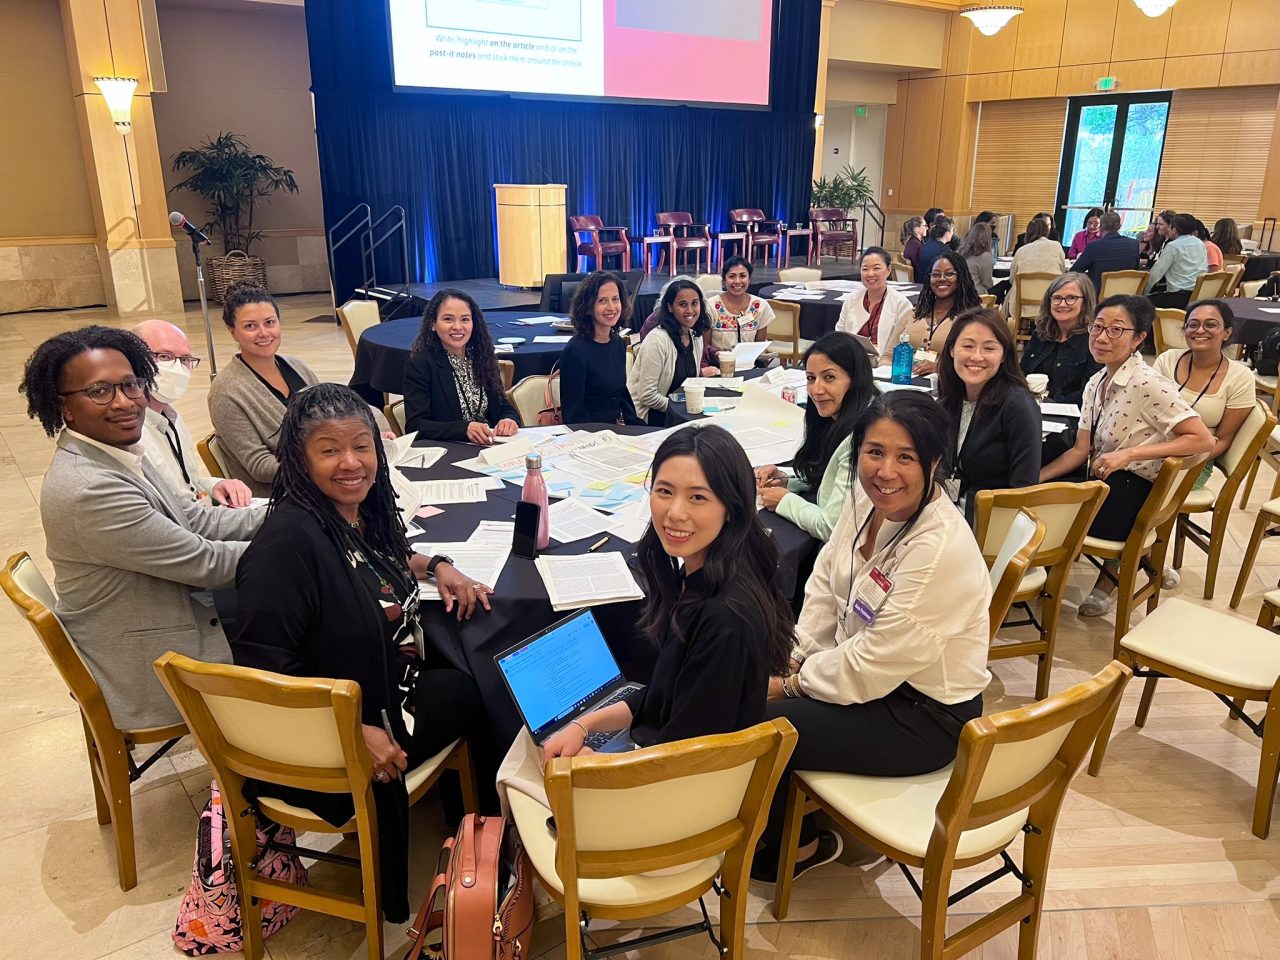 Shruti Patel: Had a great time co-leading the Clinical Trial Design work group at Stanford’s Think Tank on Diversity & Health Equity in Clinical Trials!